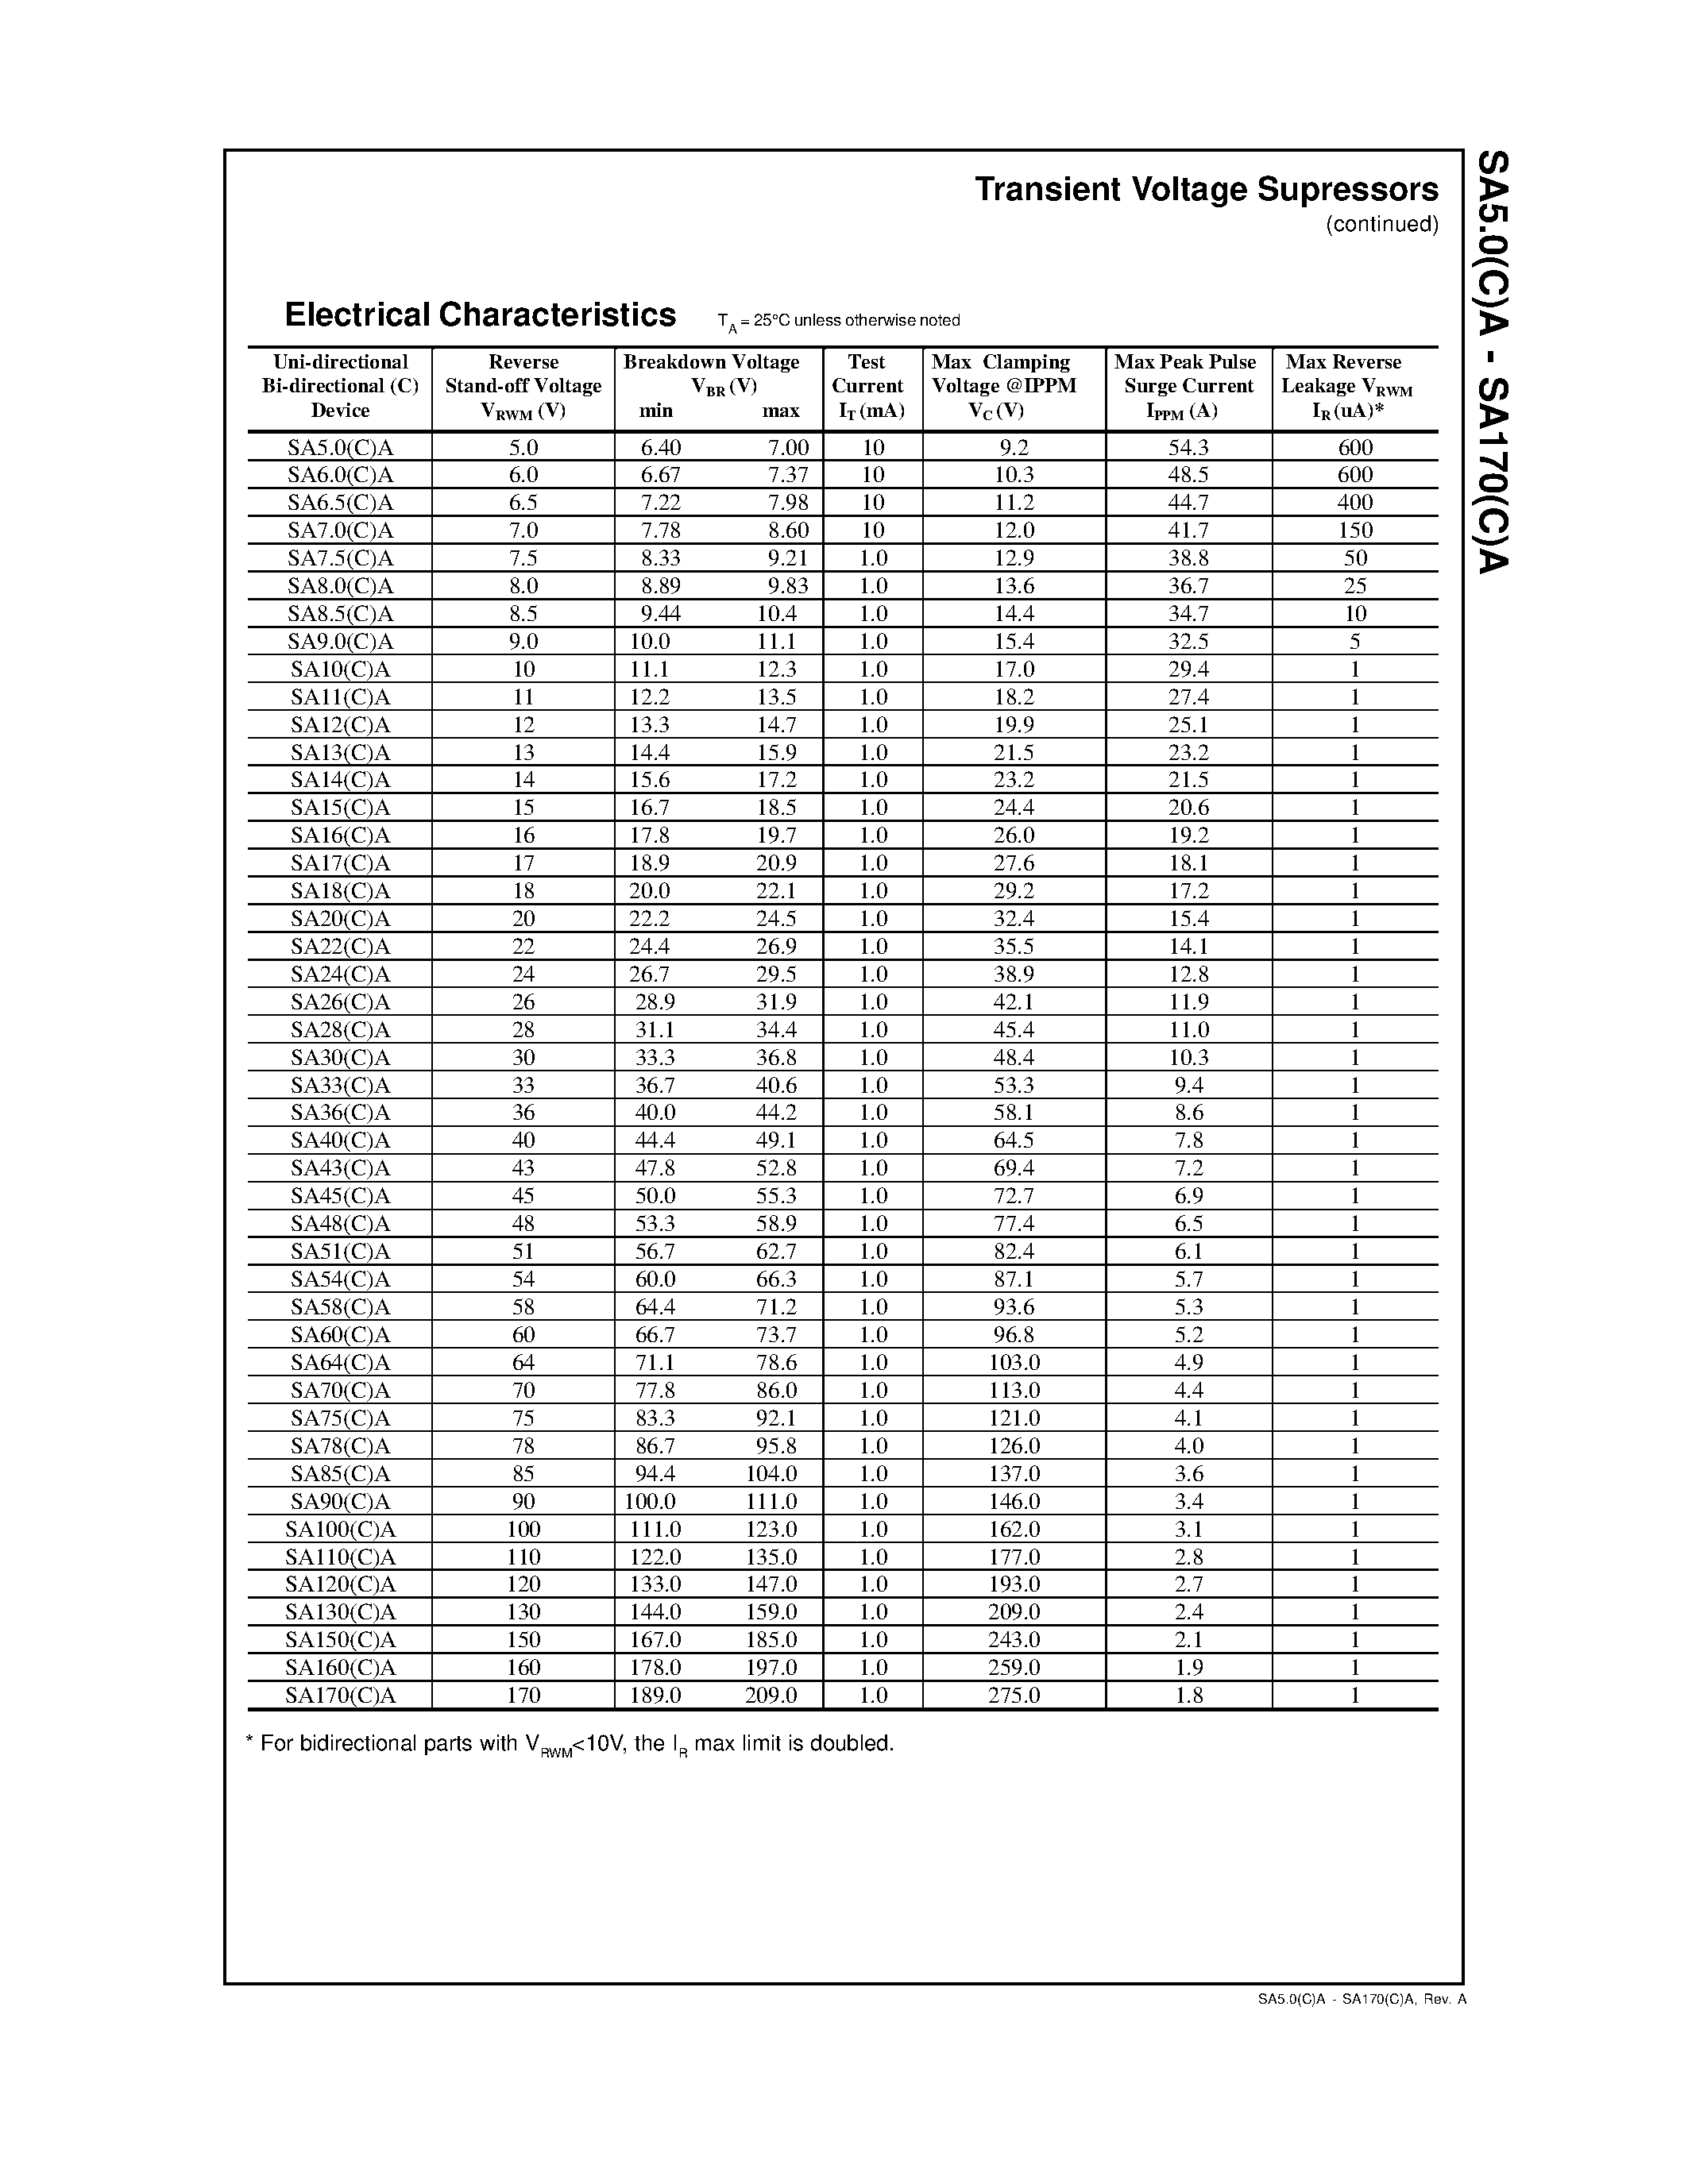 Datasheet SA33(C)A - DEVICES FOR BIPOLAR APPLICATIONS page 2